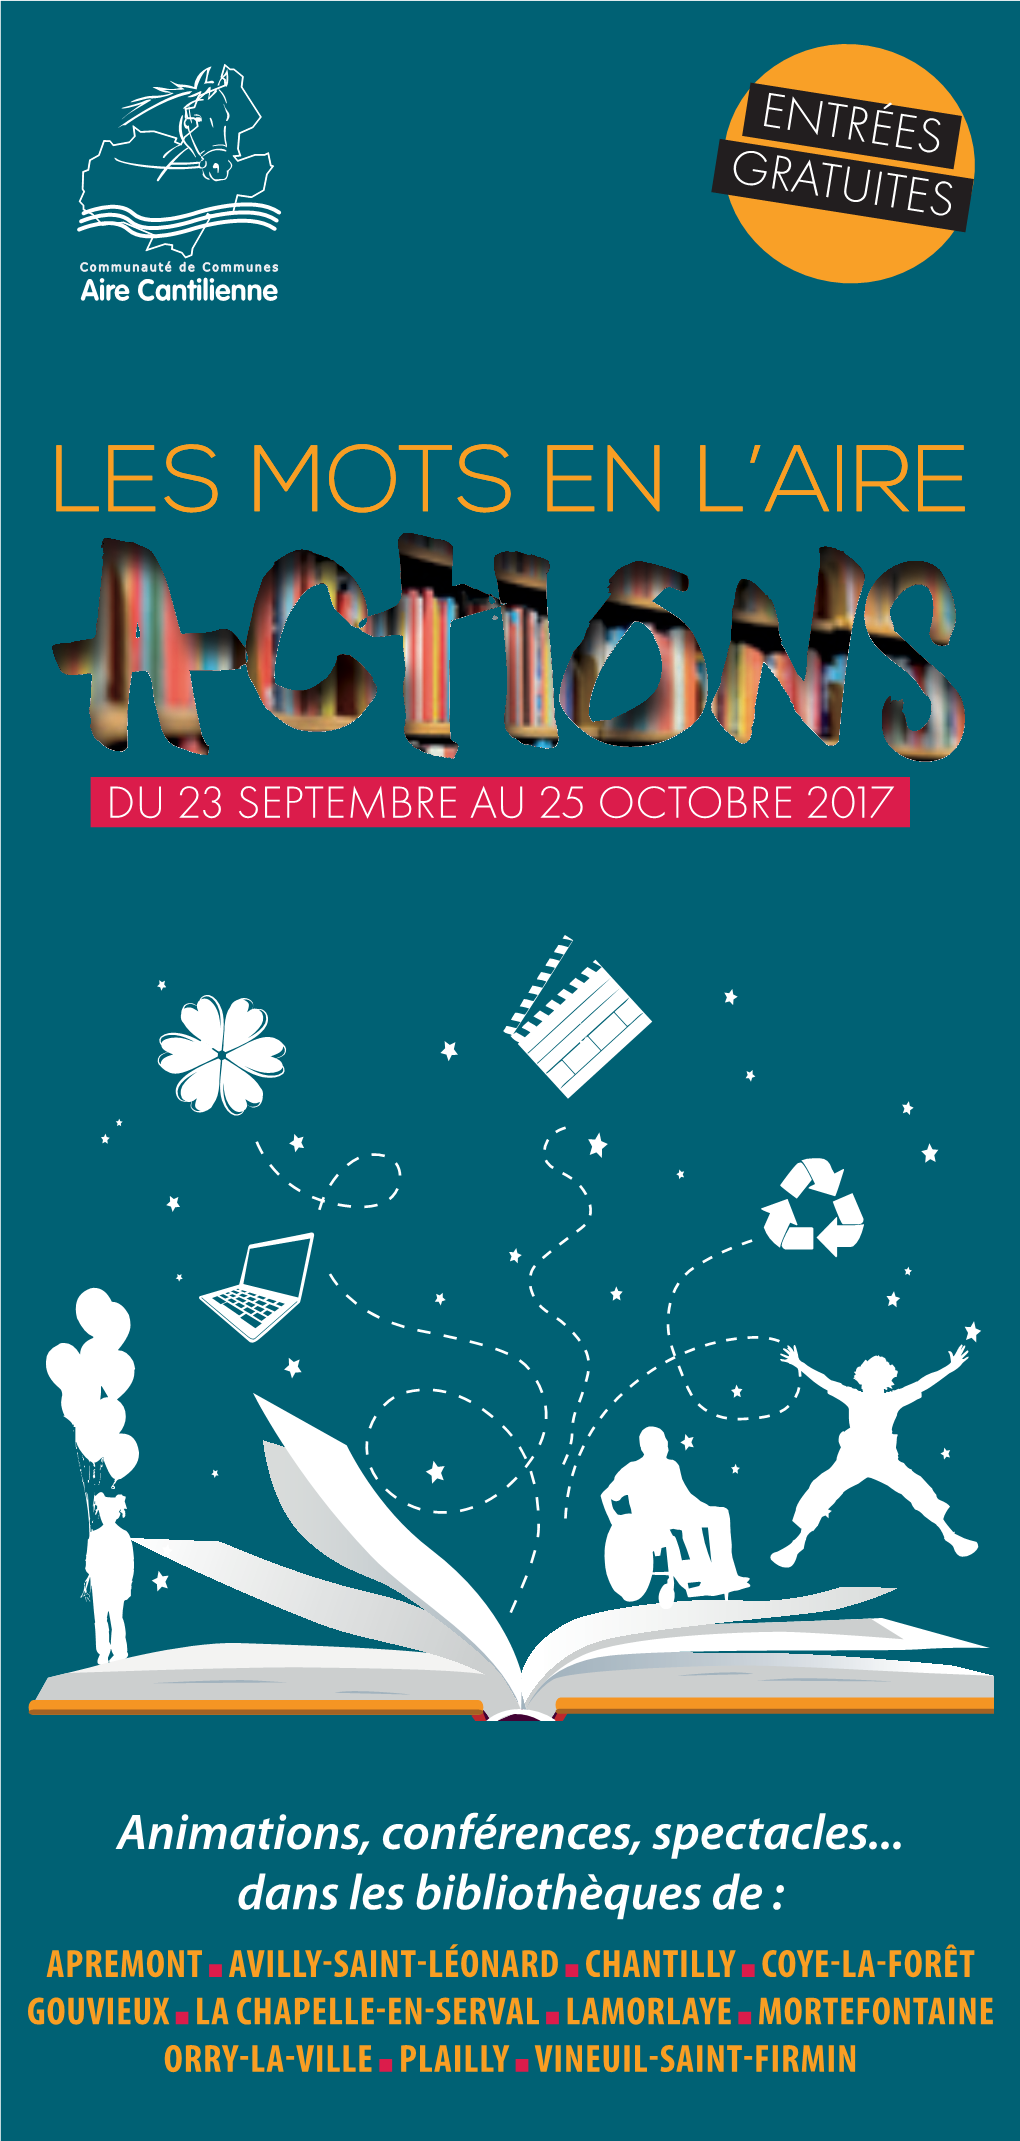 Animations, Conférences, Spectacles